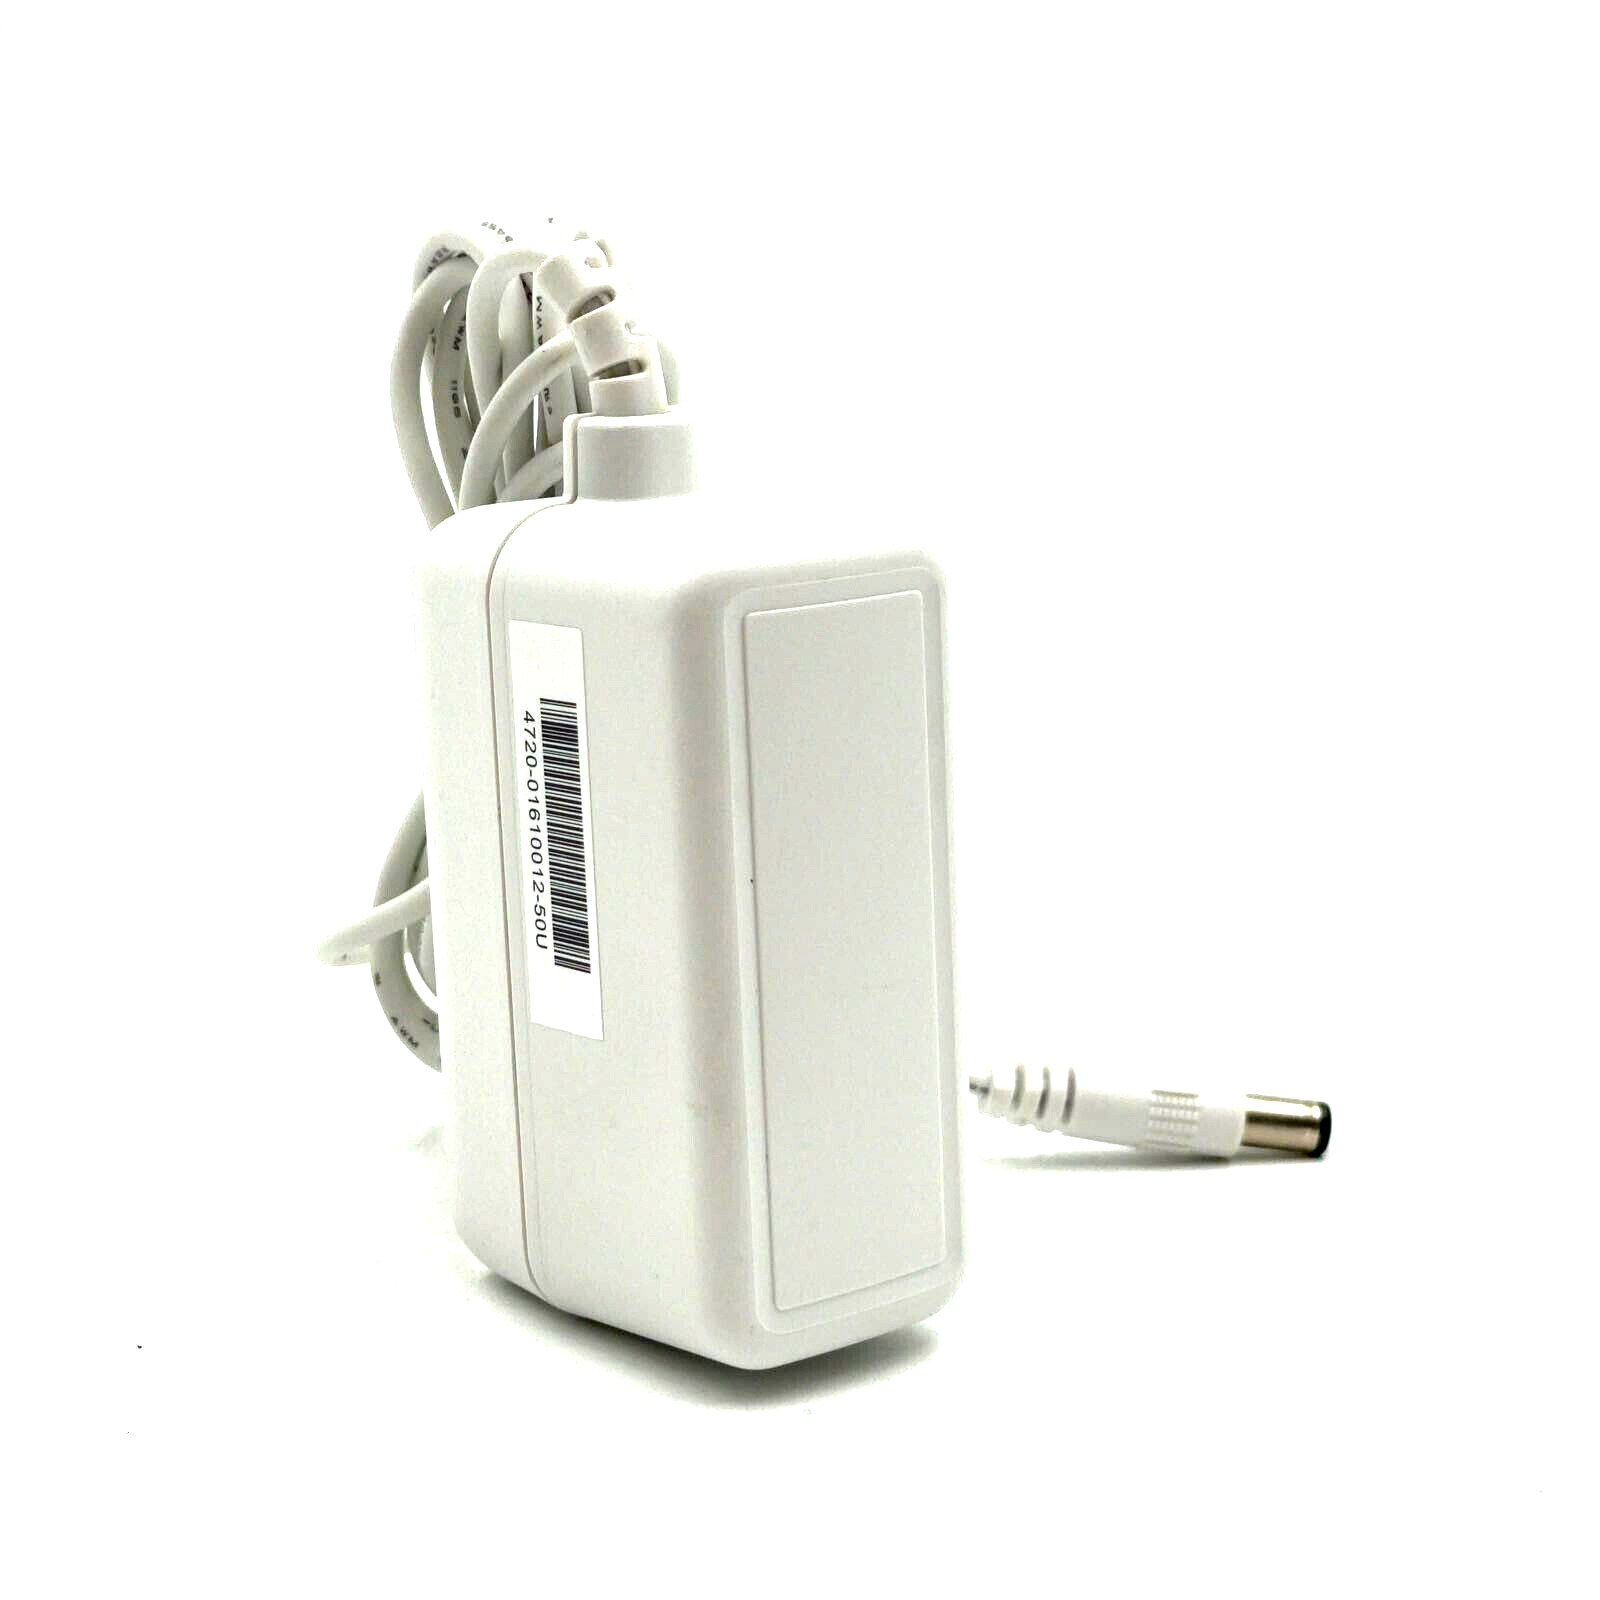 ASUS 12V 2A 24W Genuine AC Power Adapter Charger MODEL: MU24D1120200-A1 US White